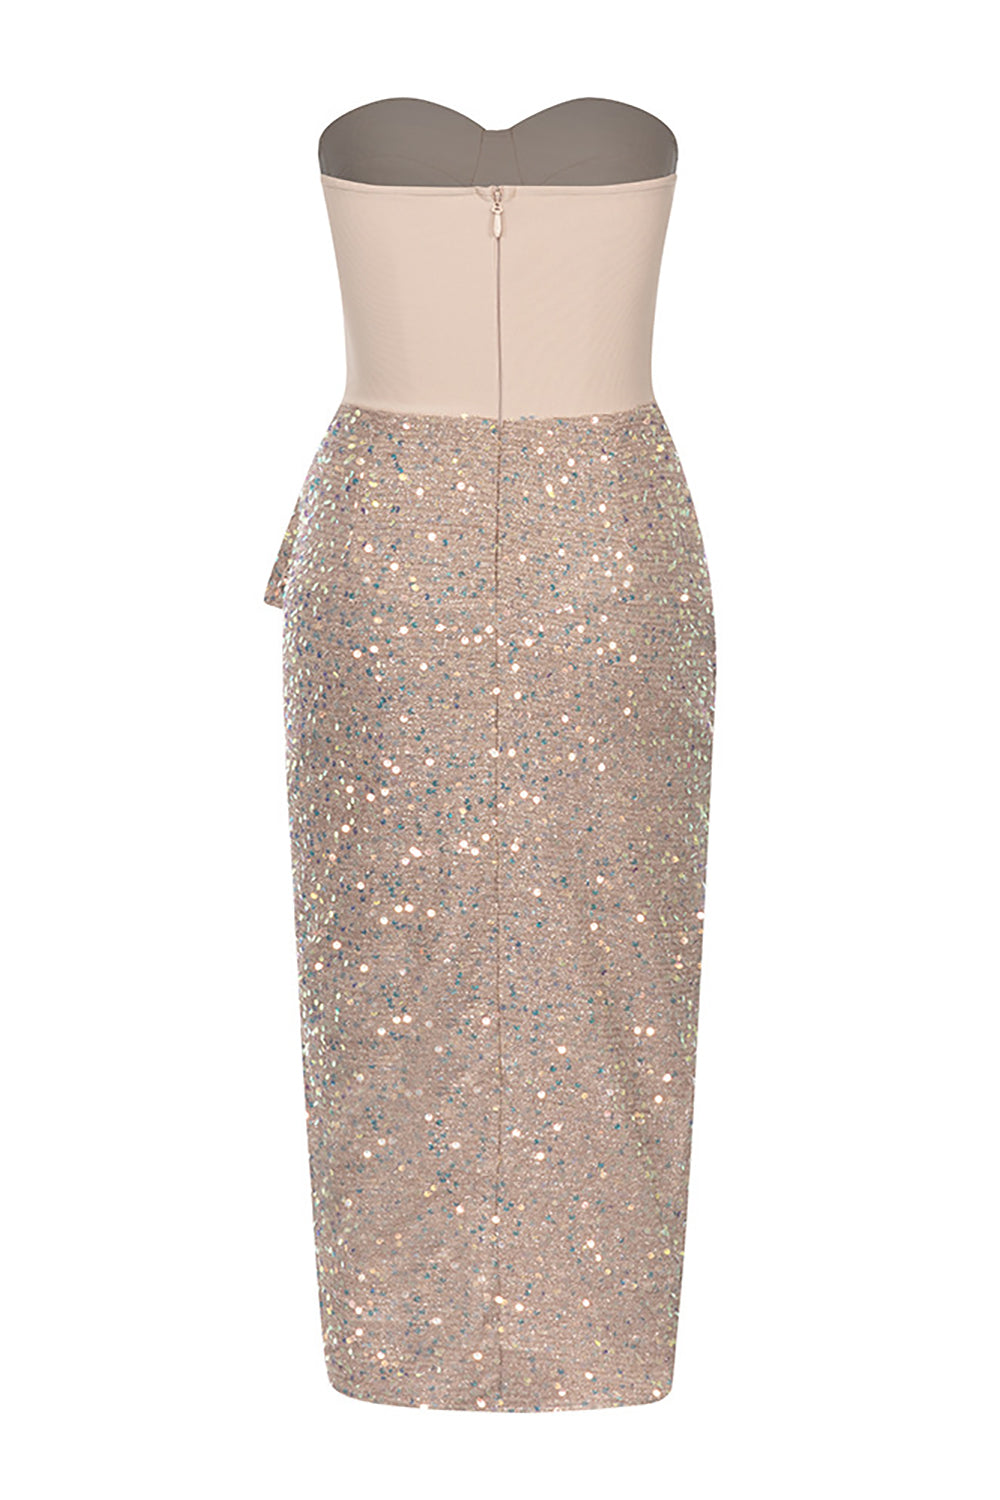 Blush Sweetheart Bodycon Sparkly Cocktail Dress With Slit